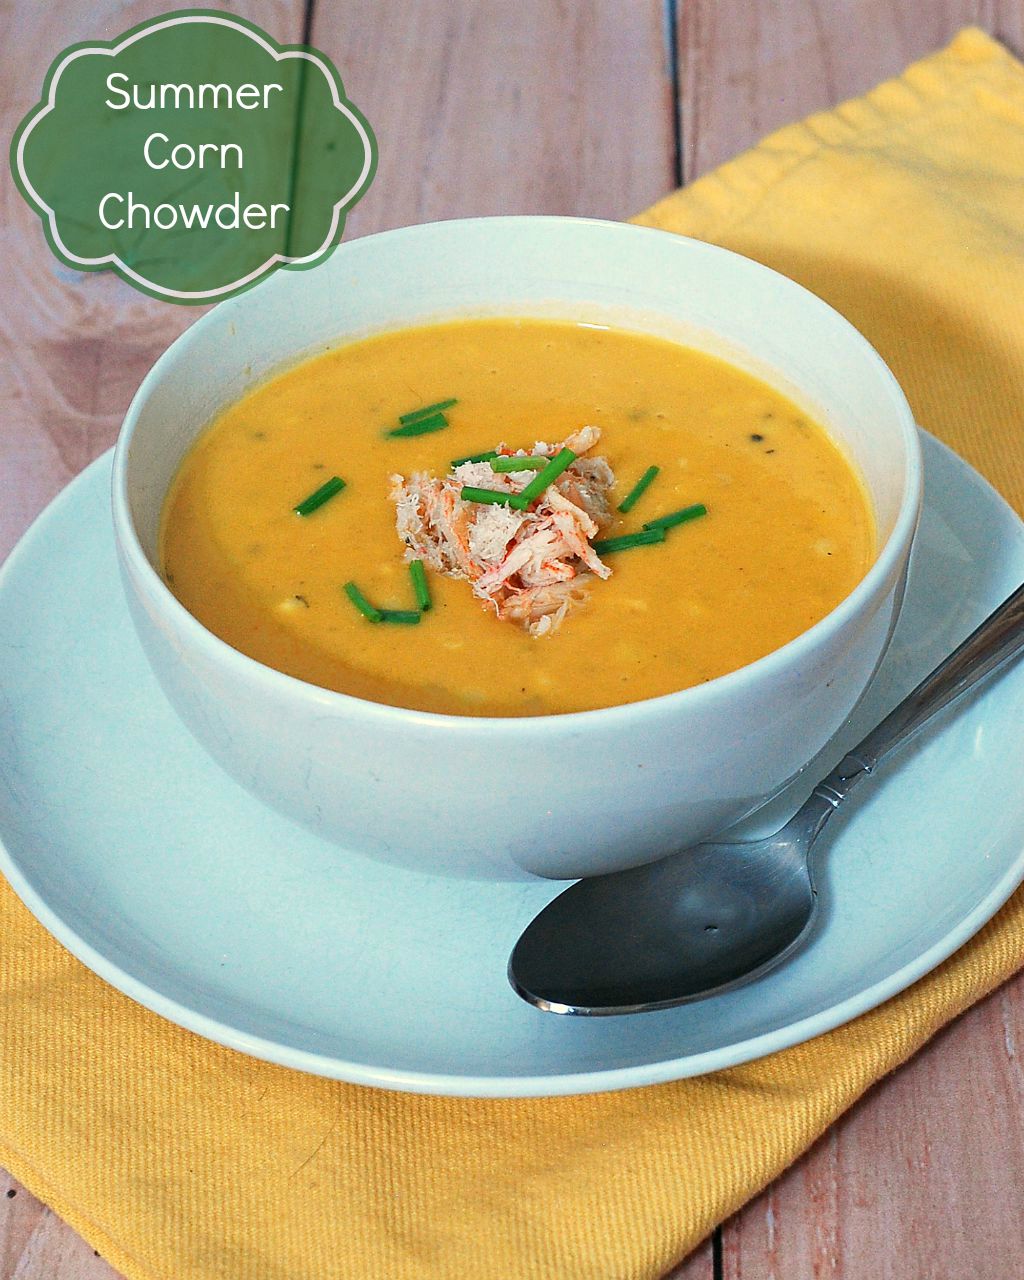 Soup in the summer? Sweet corn shines in this easy, light-but-satisfying summer corn chowder recipe, topped with succulent crabmeat. #SundaySupper TheRedheadBaker.com